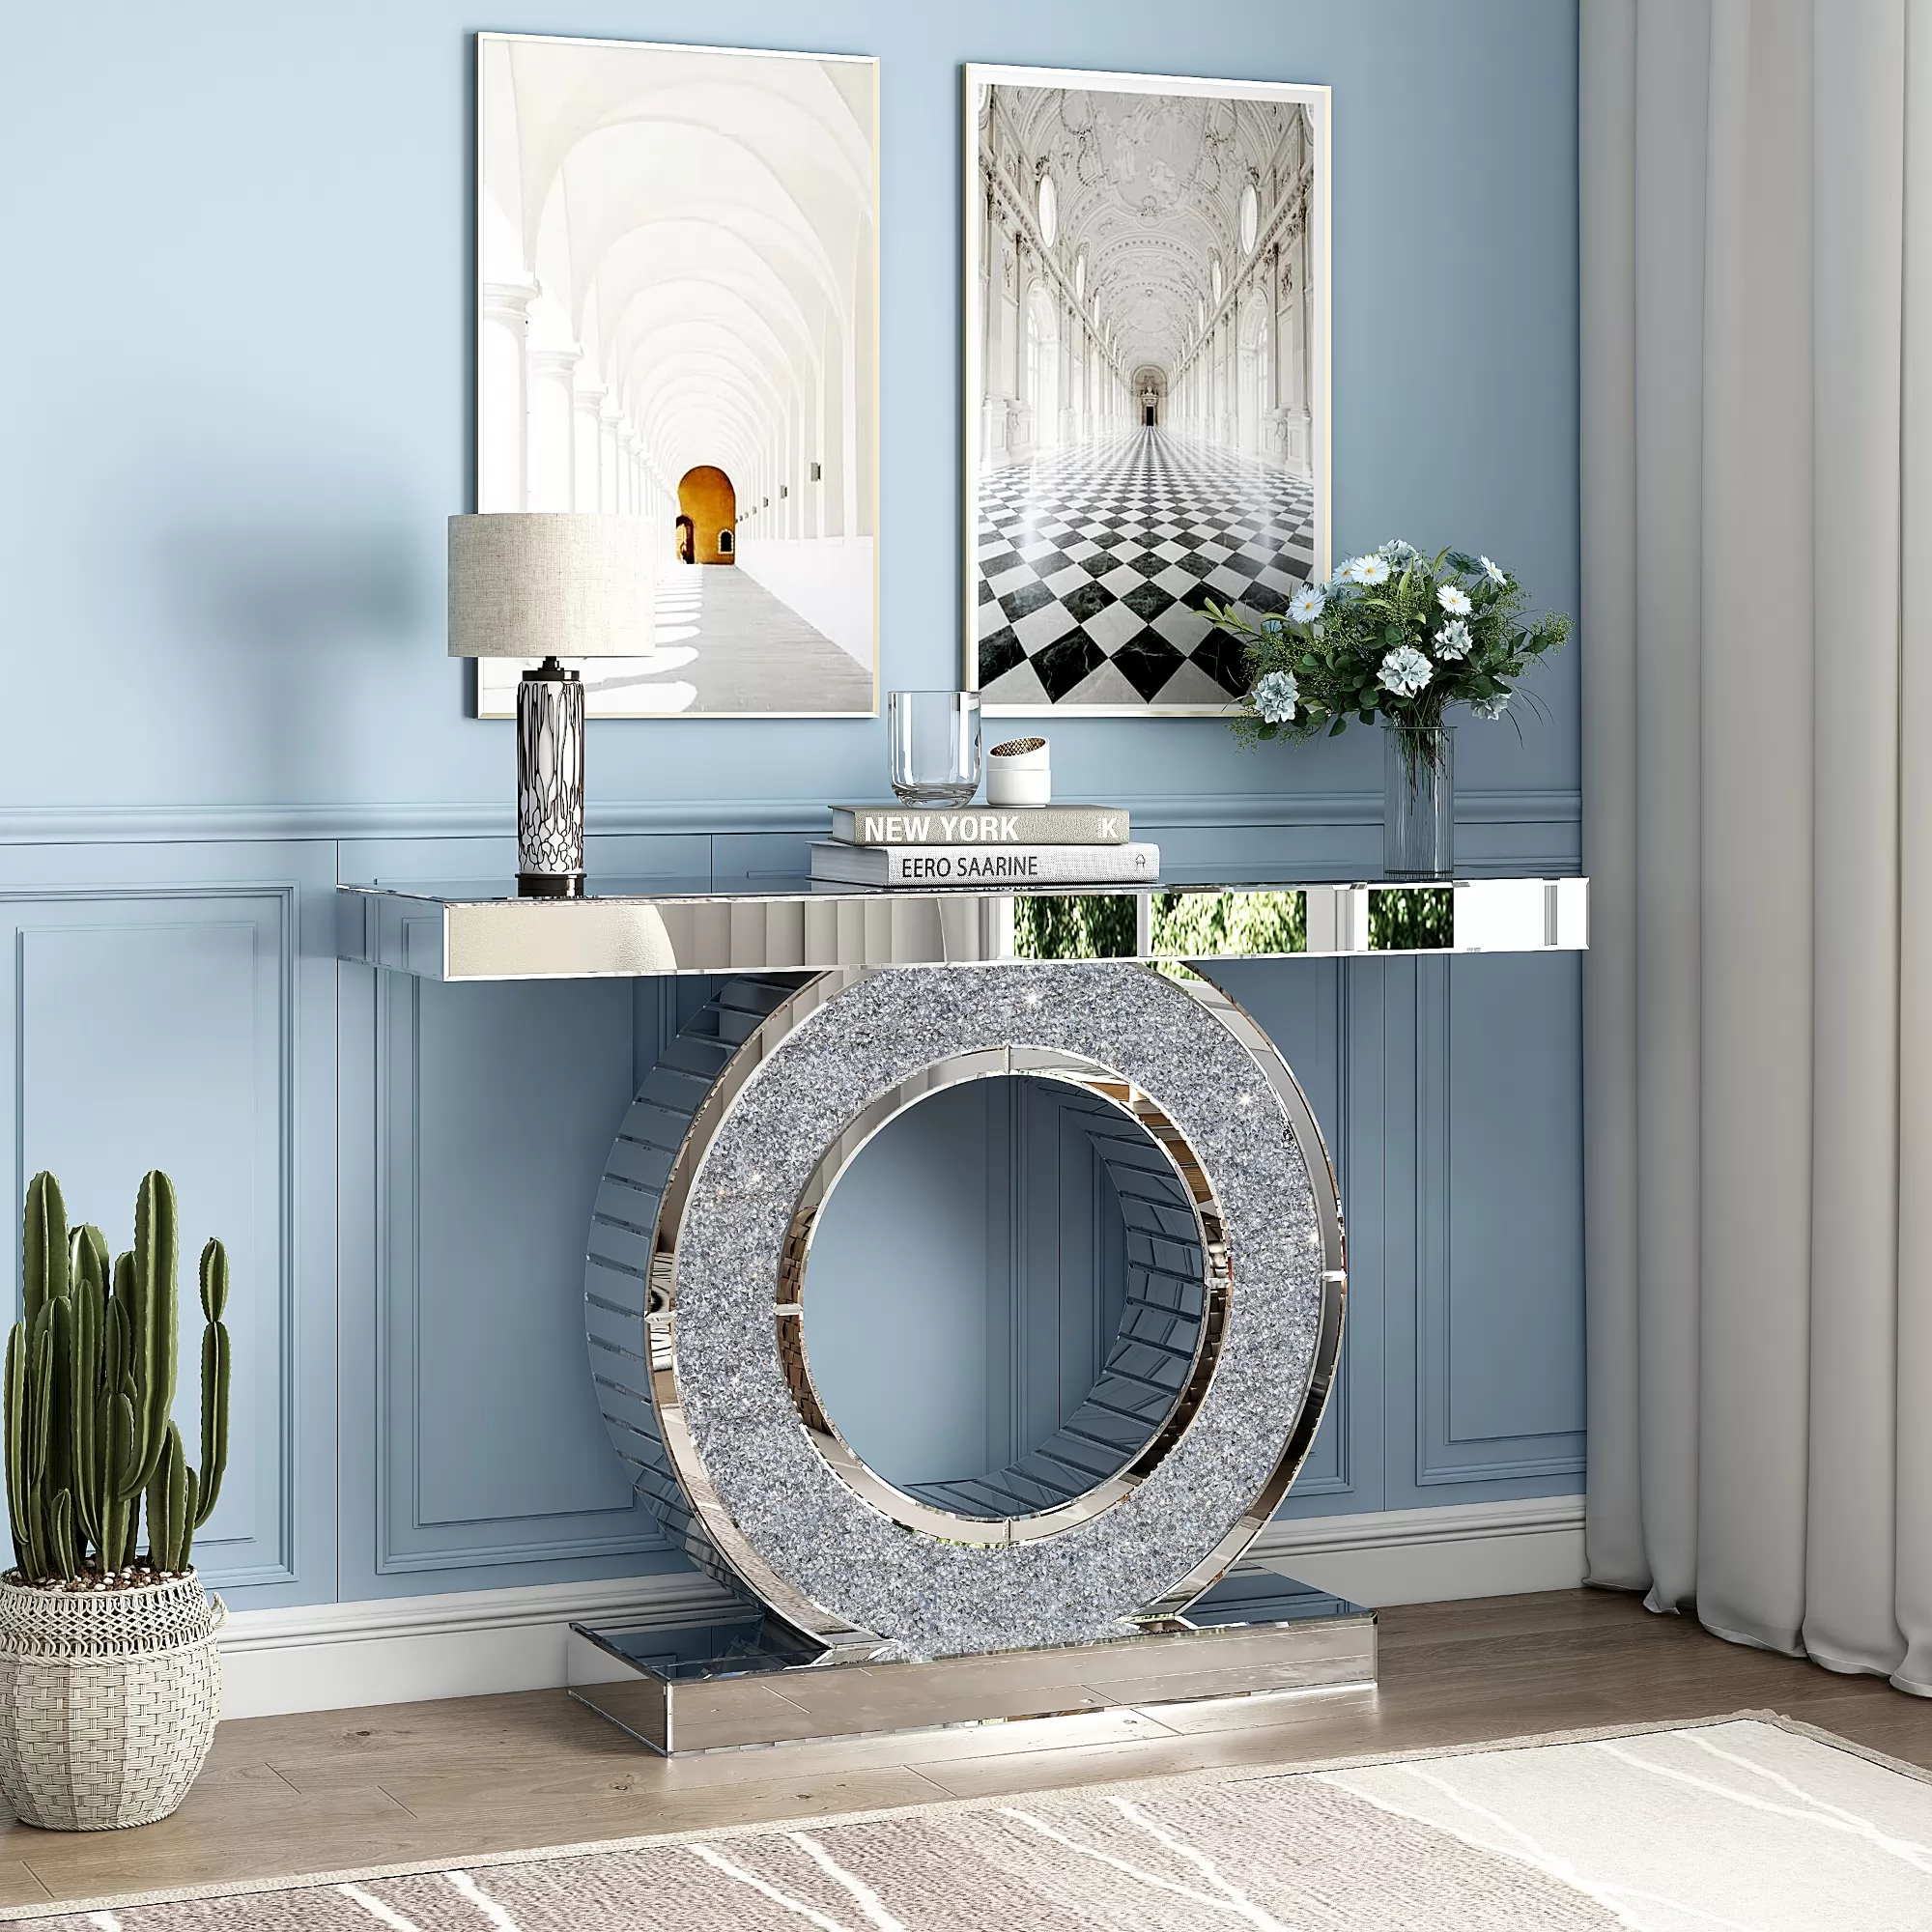 Gola 47.27" Mirrored Glass Console Table with Crush Diamond